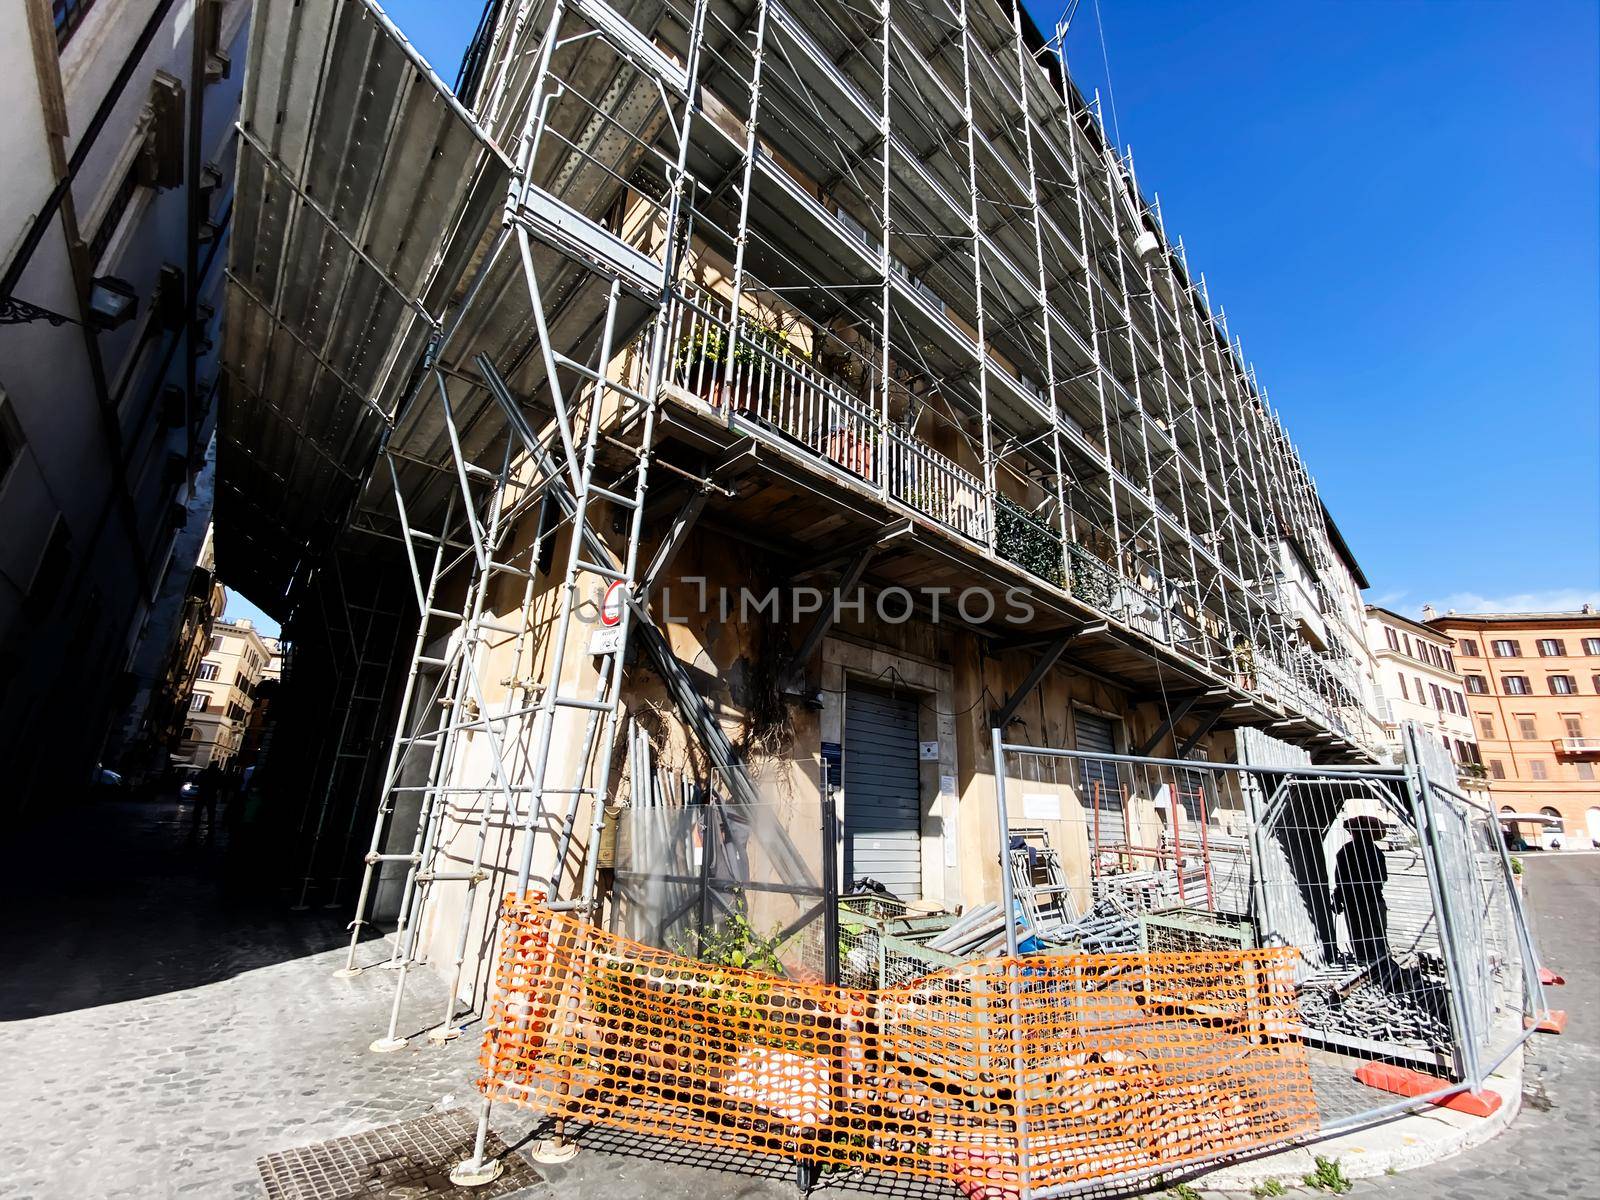 An ancient building undergoing renovation covered with steel scaffolding. by rarrarorro